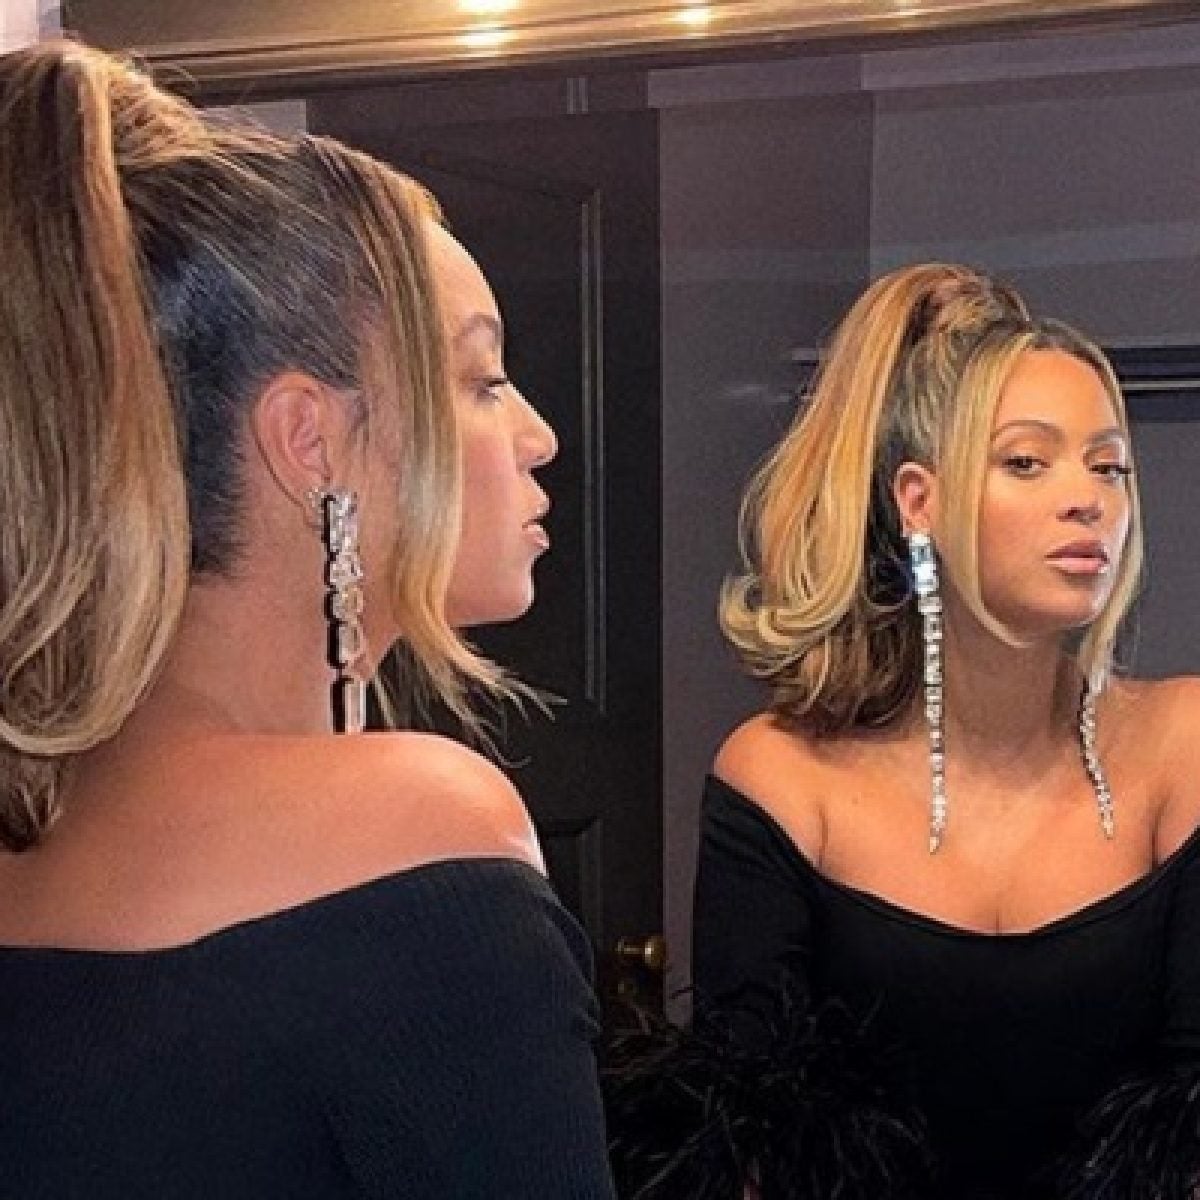 Beyoncé Shows The Girls How To Dress For Italy With Her Latest Outfits